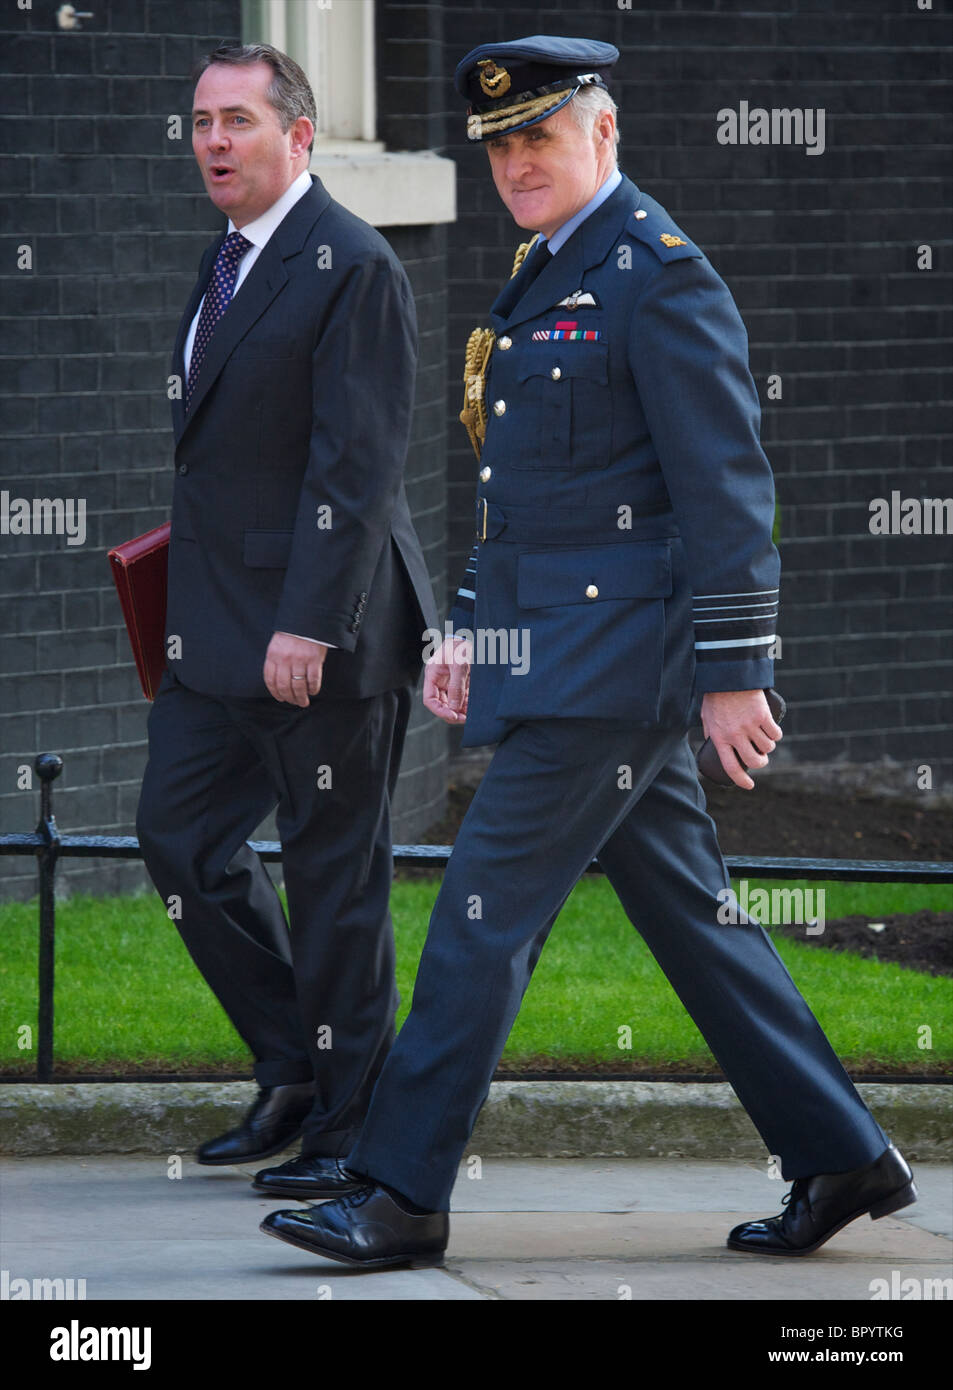 Secretary of State for Defence - Liam Fox Conservative) and Air Chief Marshal Sir Graham Eric Stirrup arriving at Downing Street Stock Photo